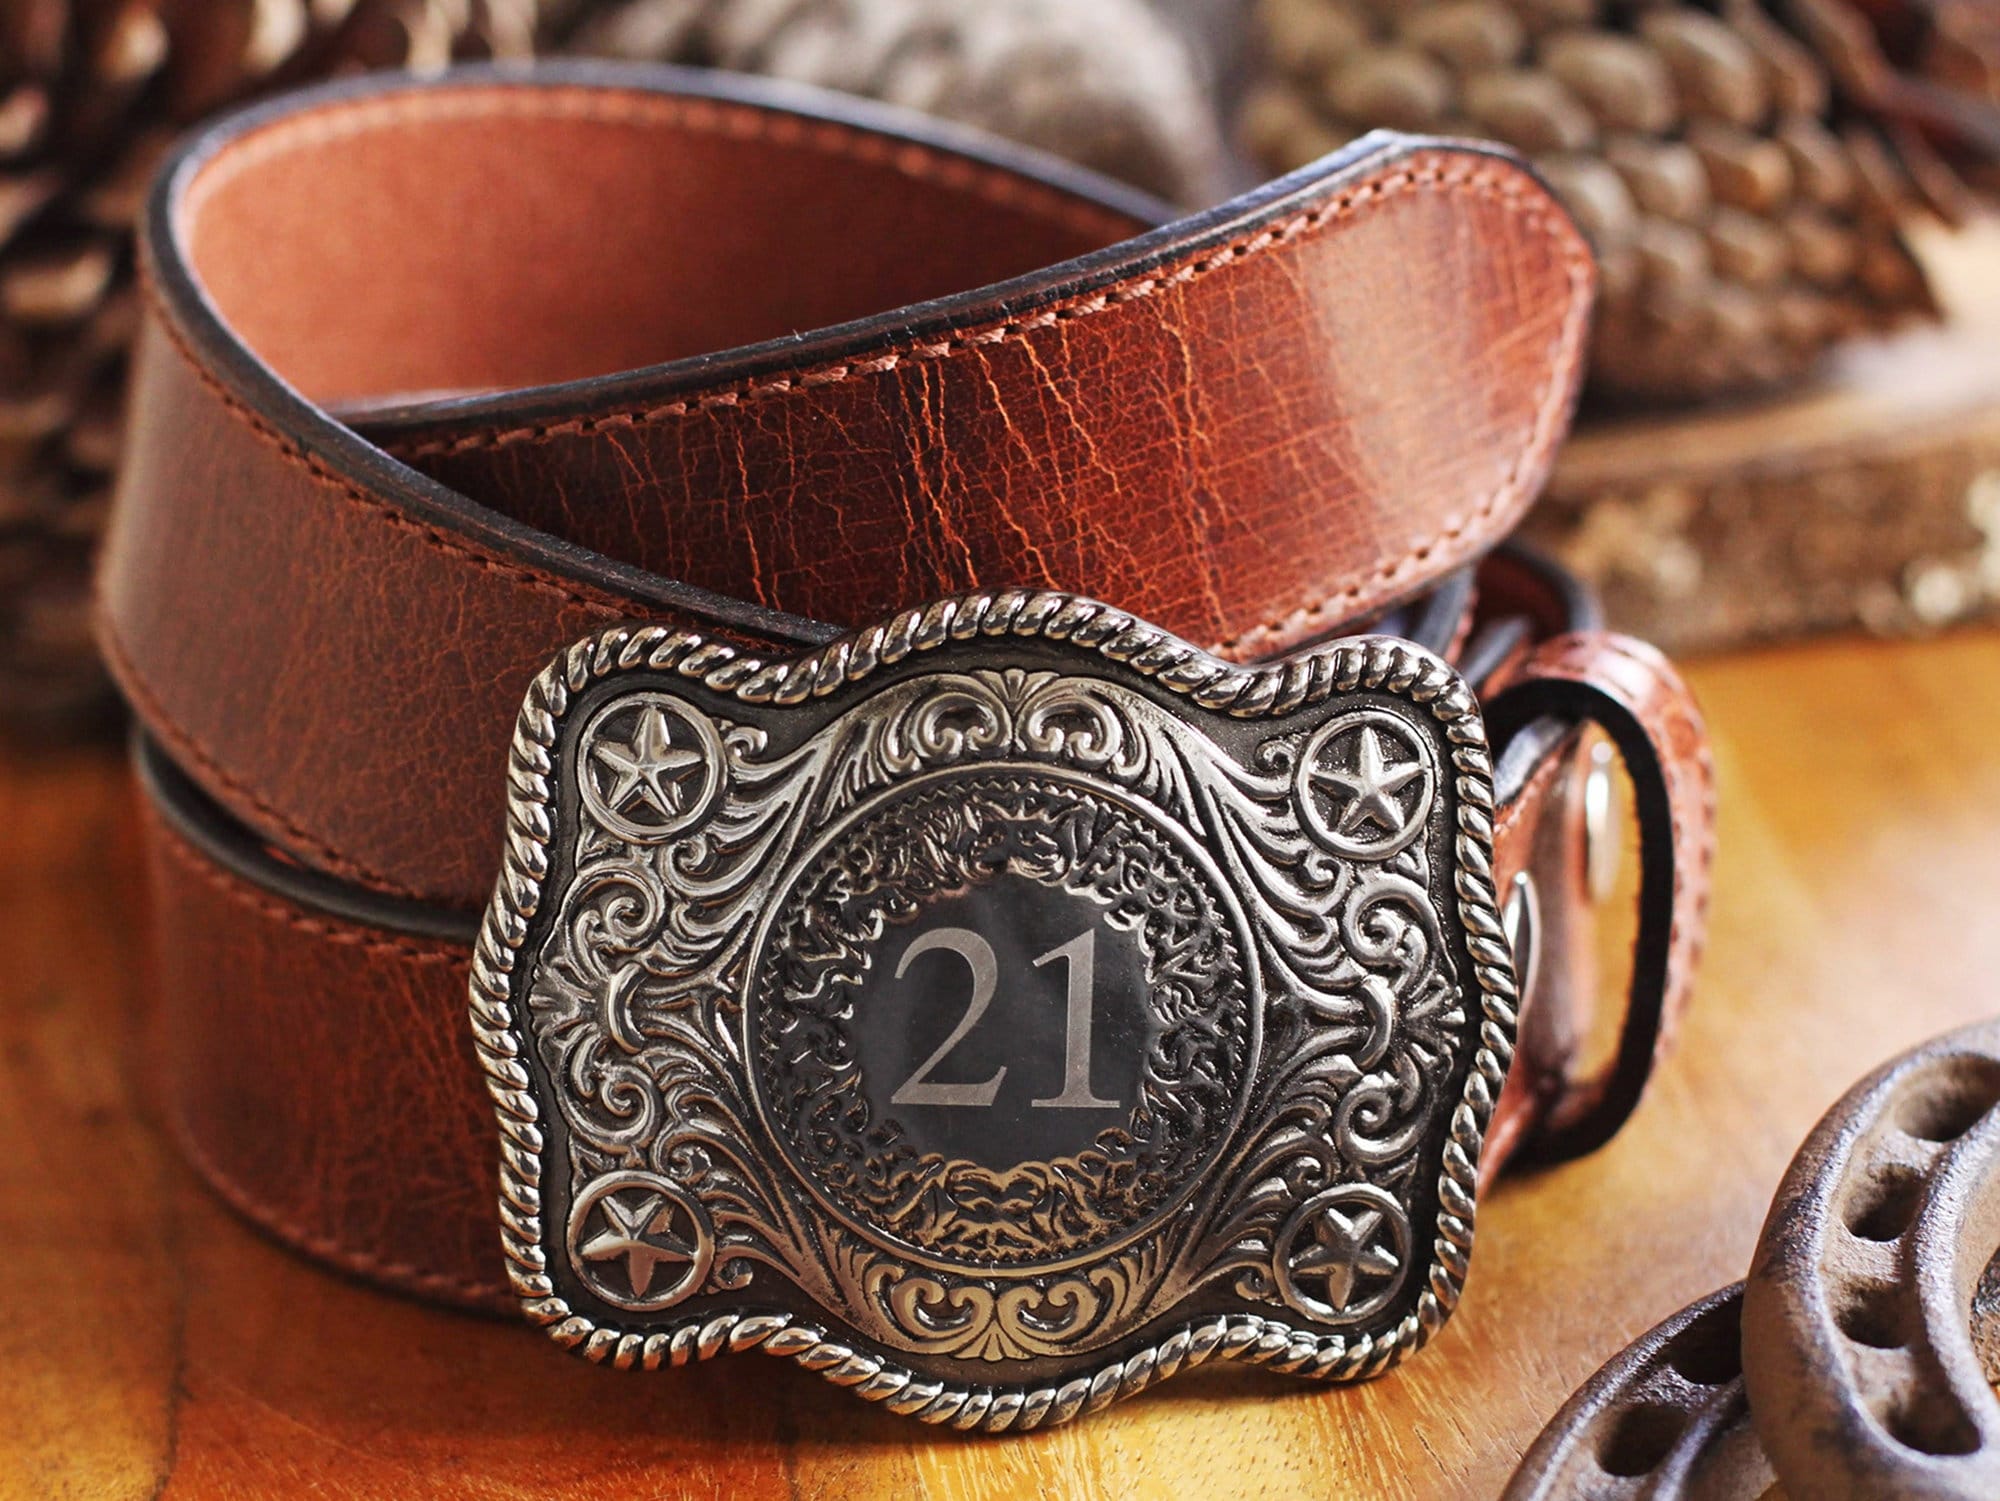 Made in USA Silver Belt Buckle - USA Amish Made Leather Belt